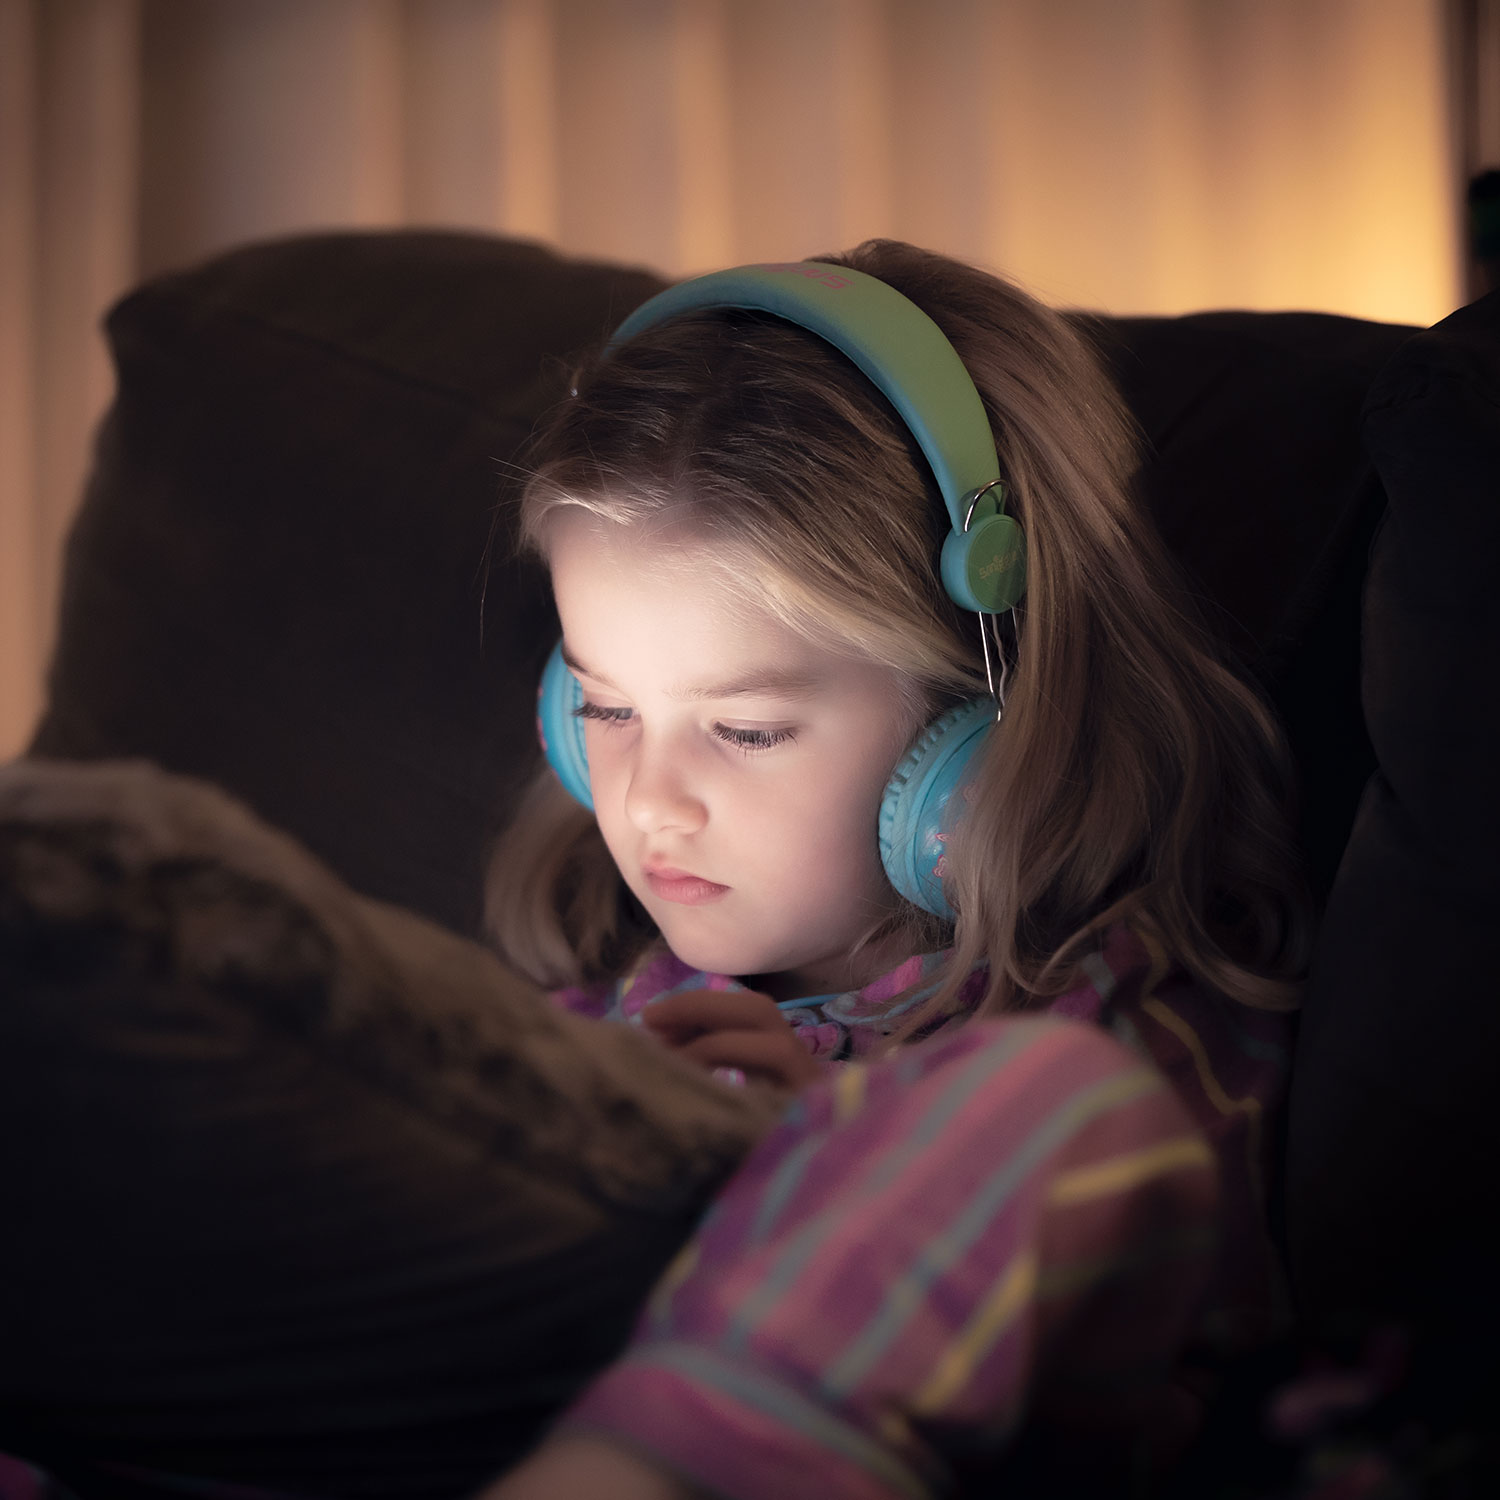 Children's screen time and links to sleep, language and cognitive development^empty:{ds__assetid^as_asset:asset_name}